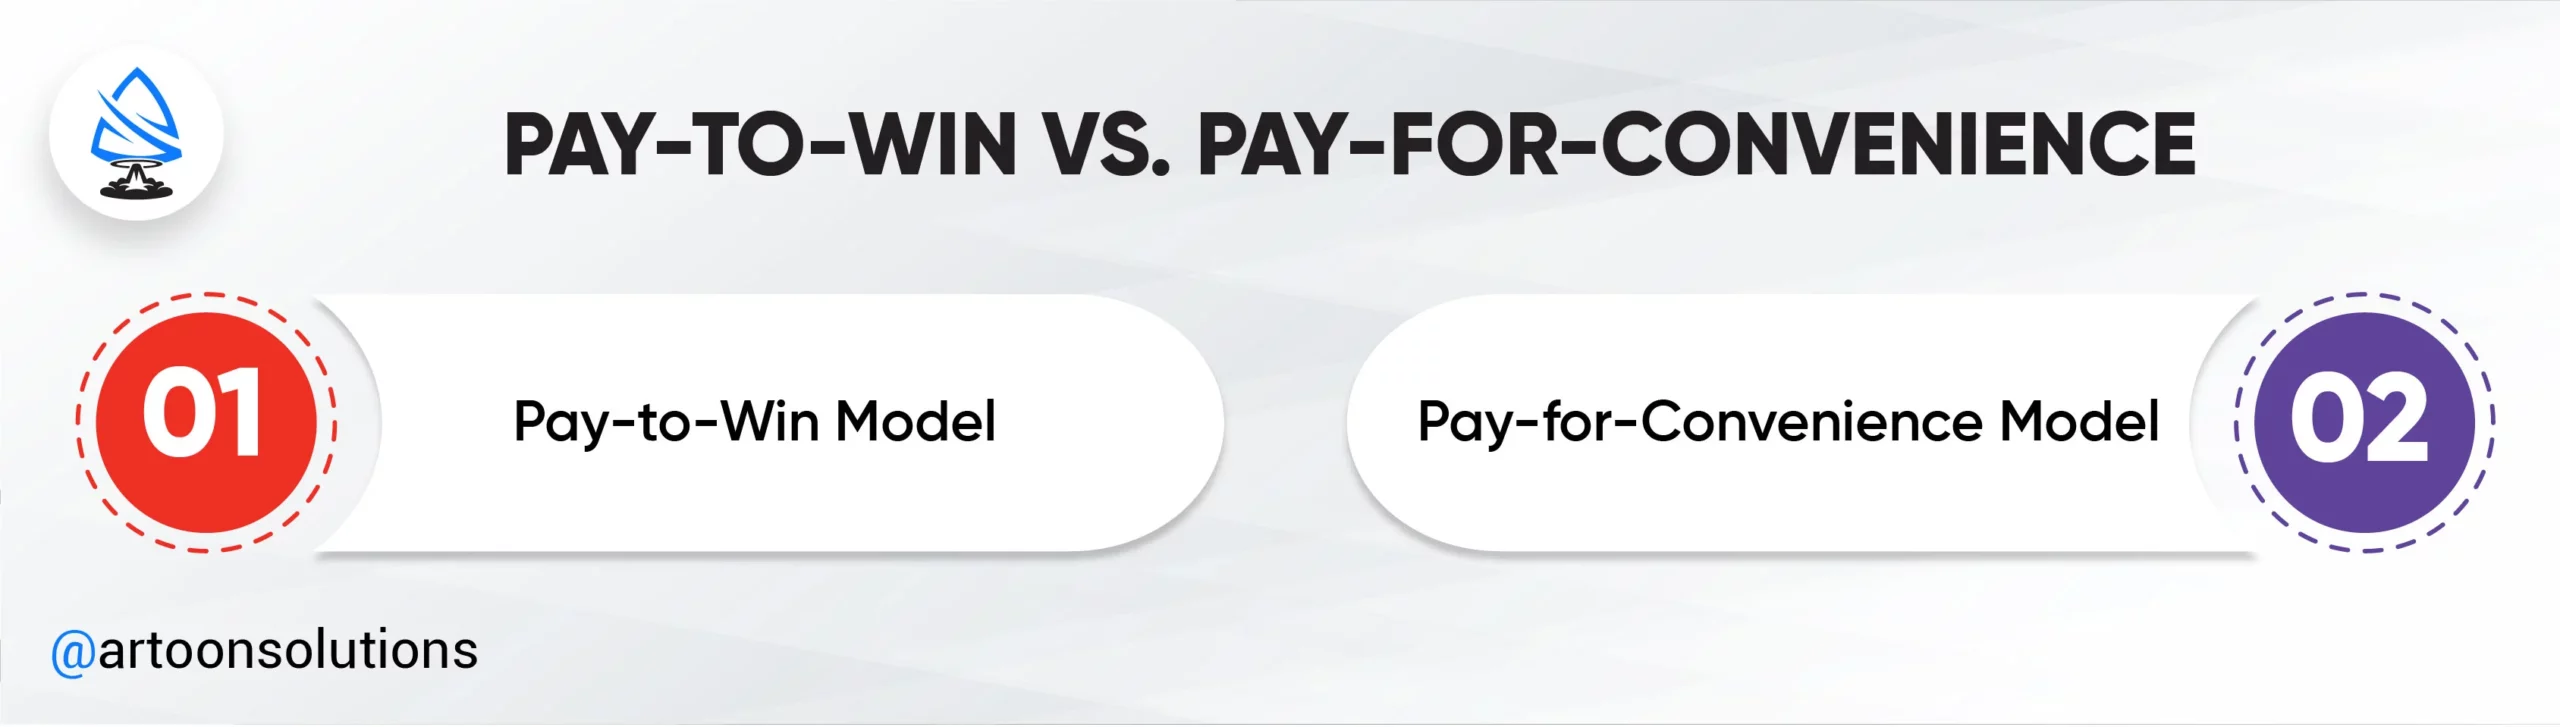 Pay-to-Win vs. Pay-for-Convenience